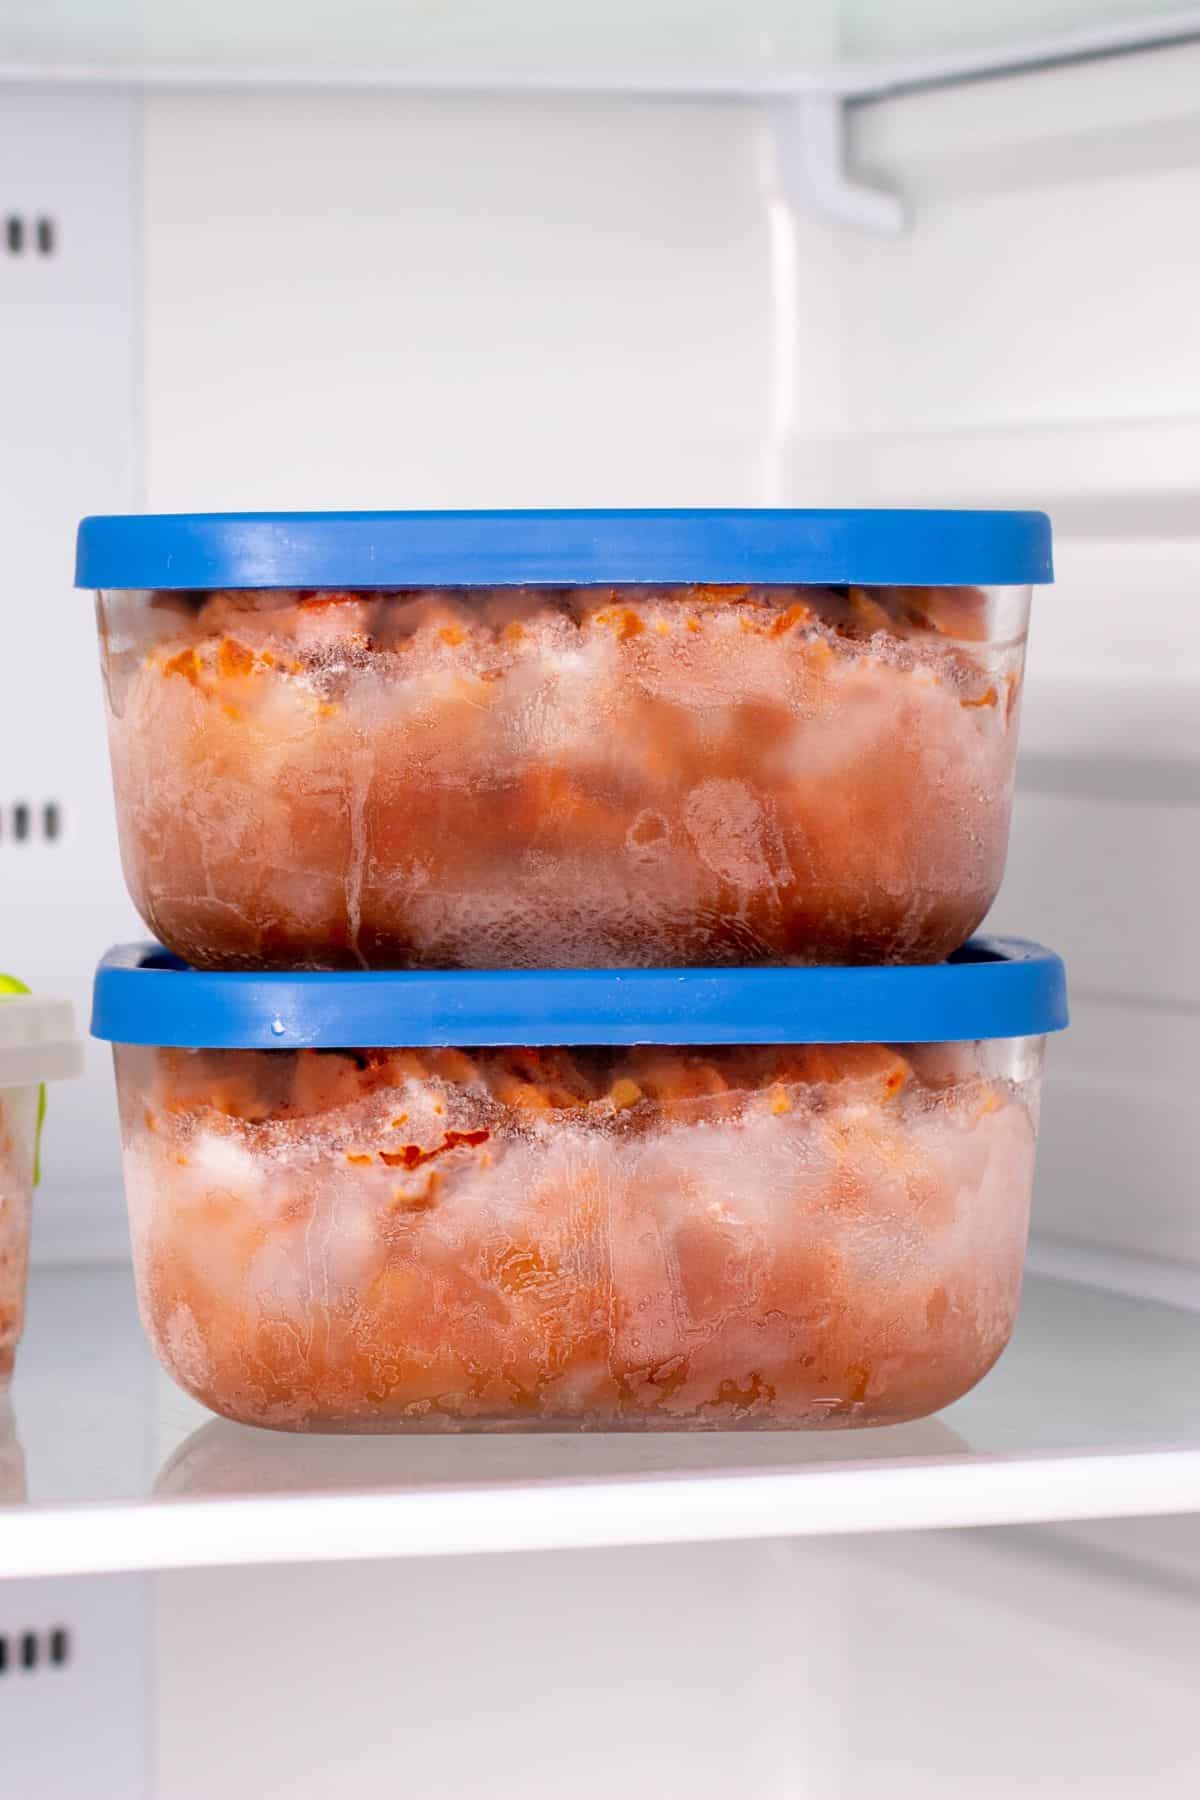 https://www.cleaneatingkitchen.com/wp-content/uploads/2022/11/frozen-beef-stew-in-glass-containers-in-freezer.jpg